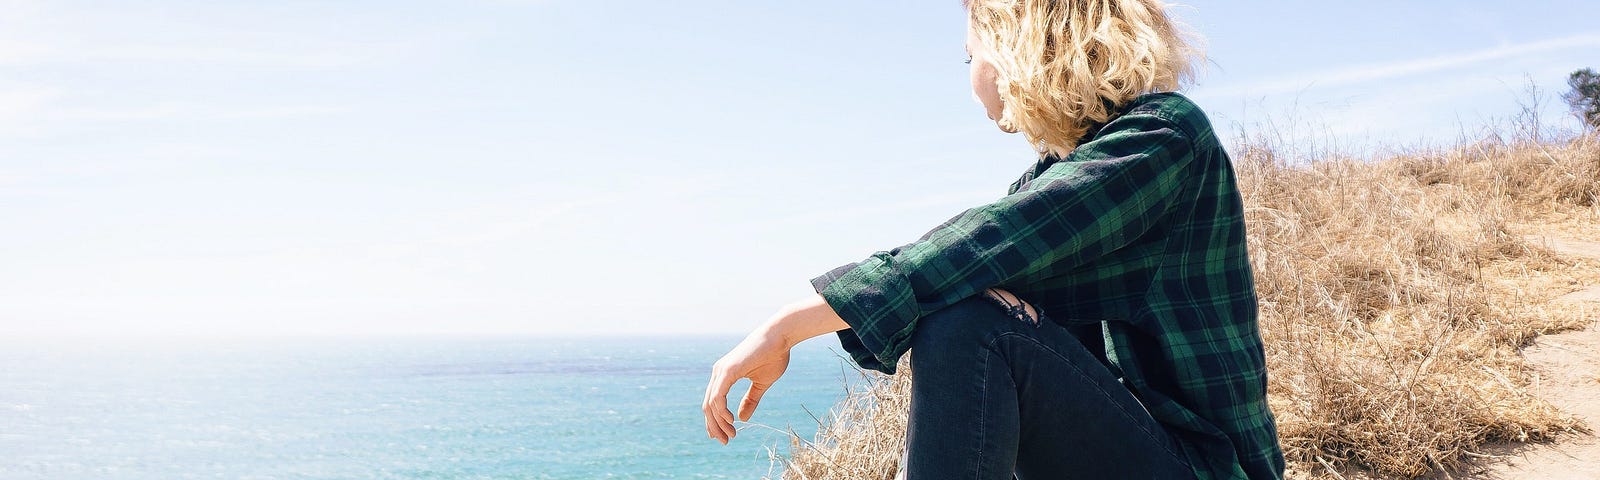 blond woman sitting on a cliff overlooking the ocean imagining her dreams coming true